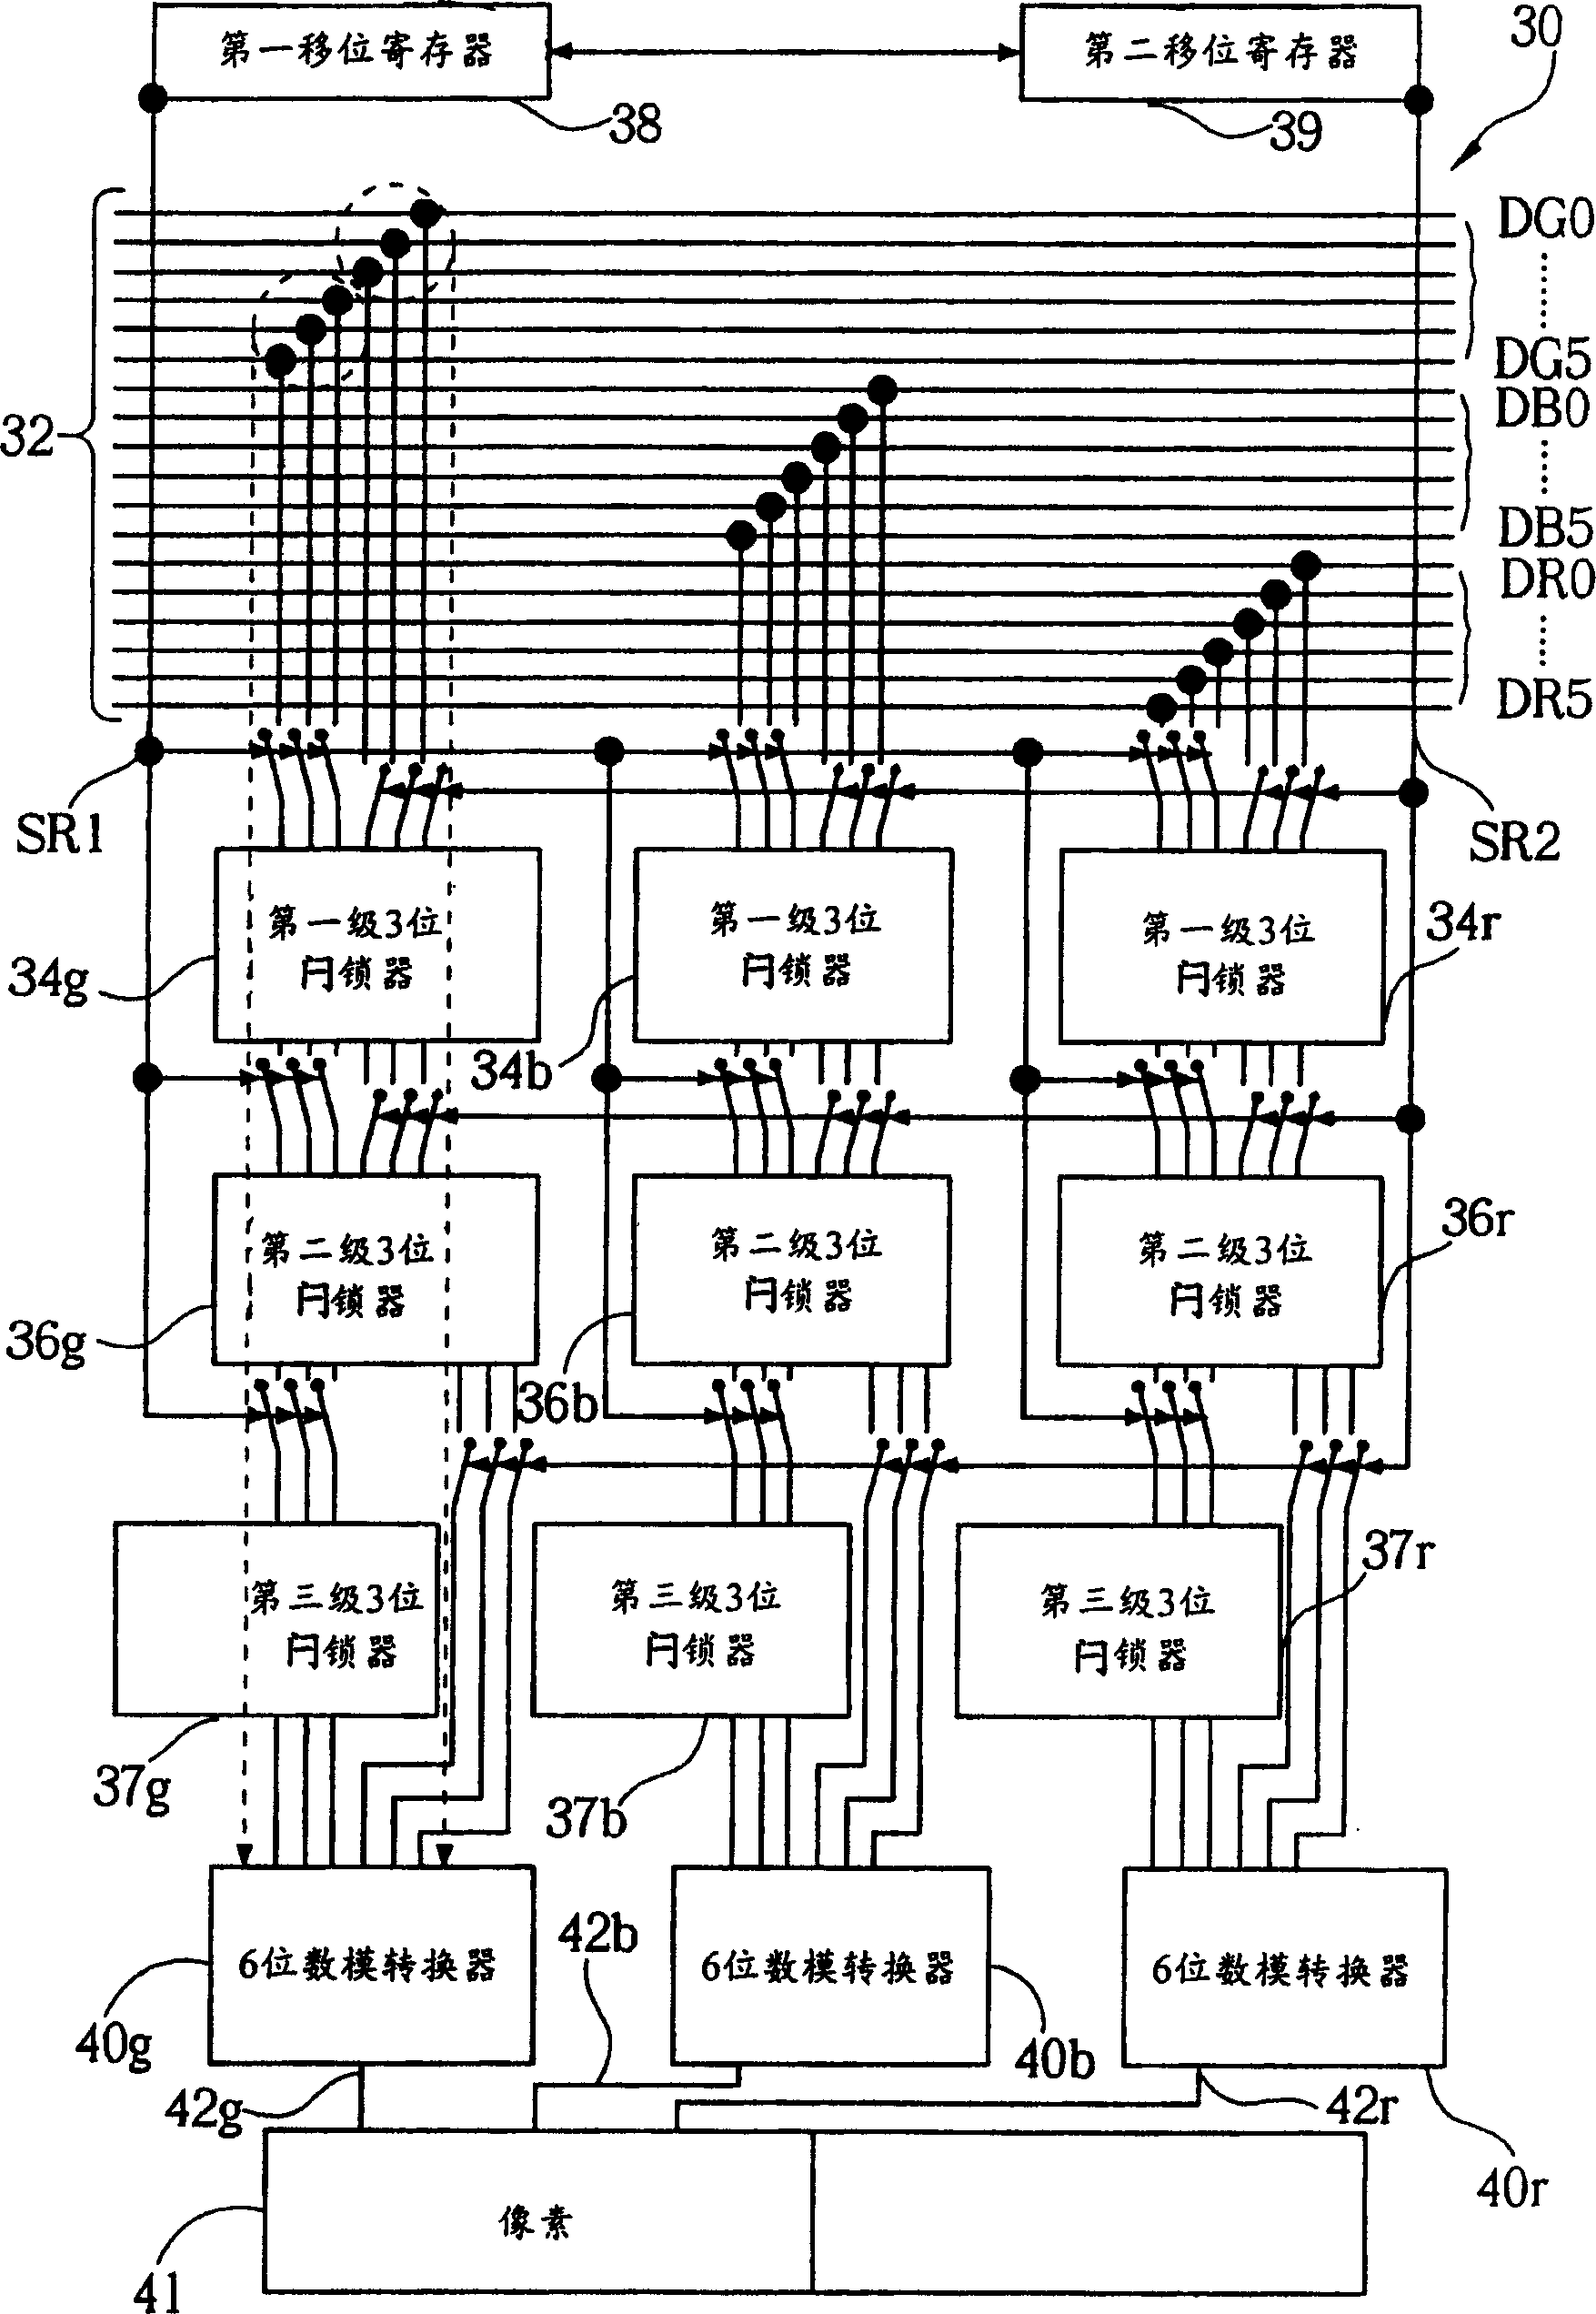 Data driving circuit and its method of driving data